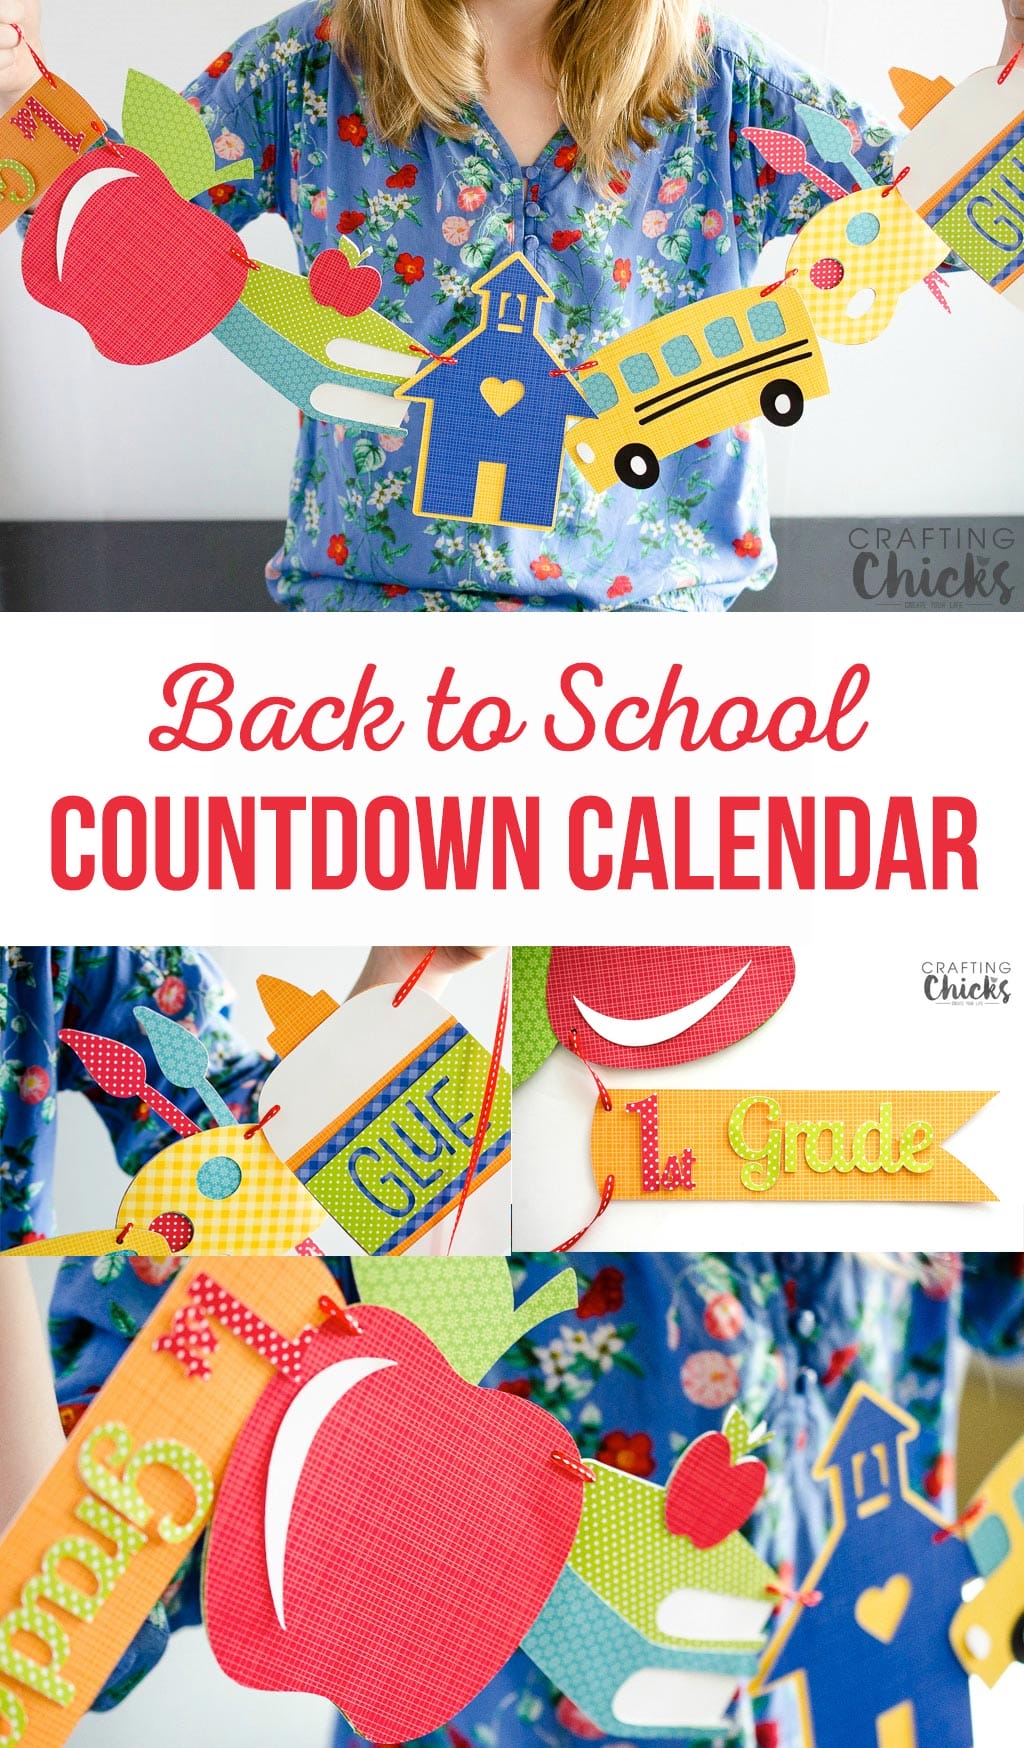 Back to School Countdown Calendar | School is Cool kids Craft. Help banish those back to school butterflies with this easy craft. It's also a great keepsake for them to look back on.